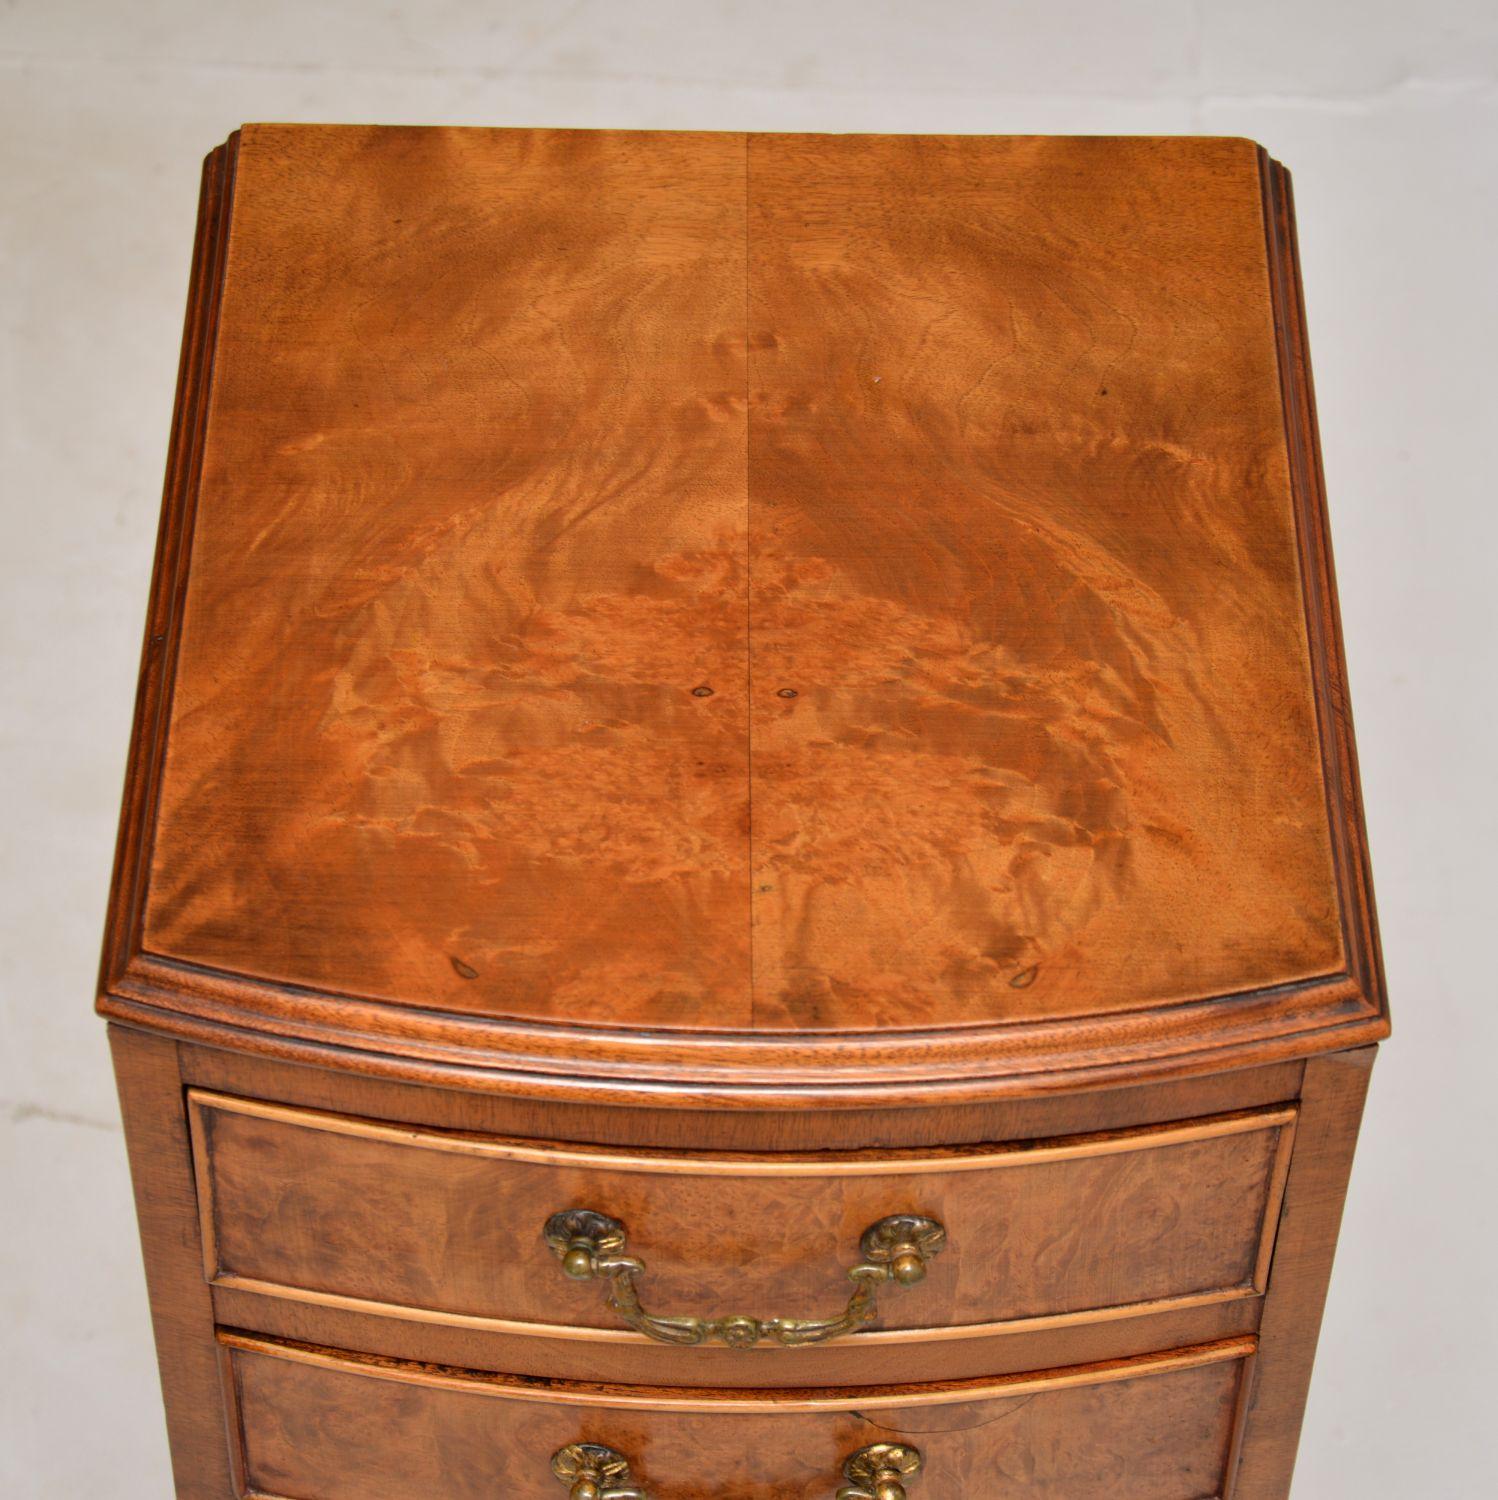 Early 20th Century Antique Burr Walnut Bedside Chest on Legs For Sale